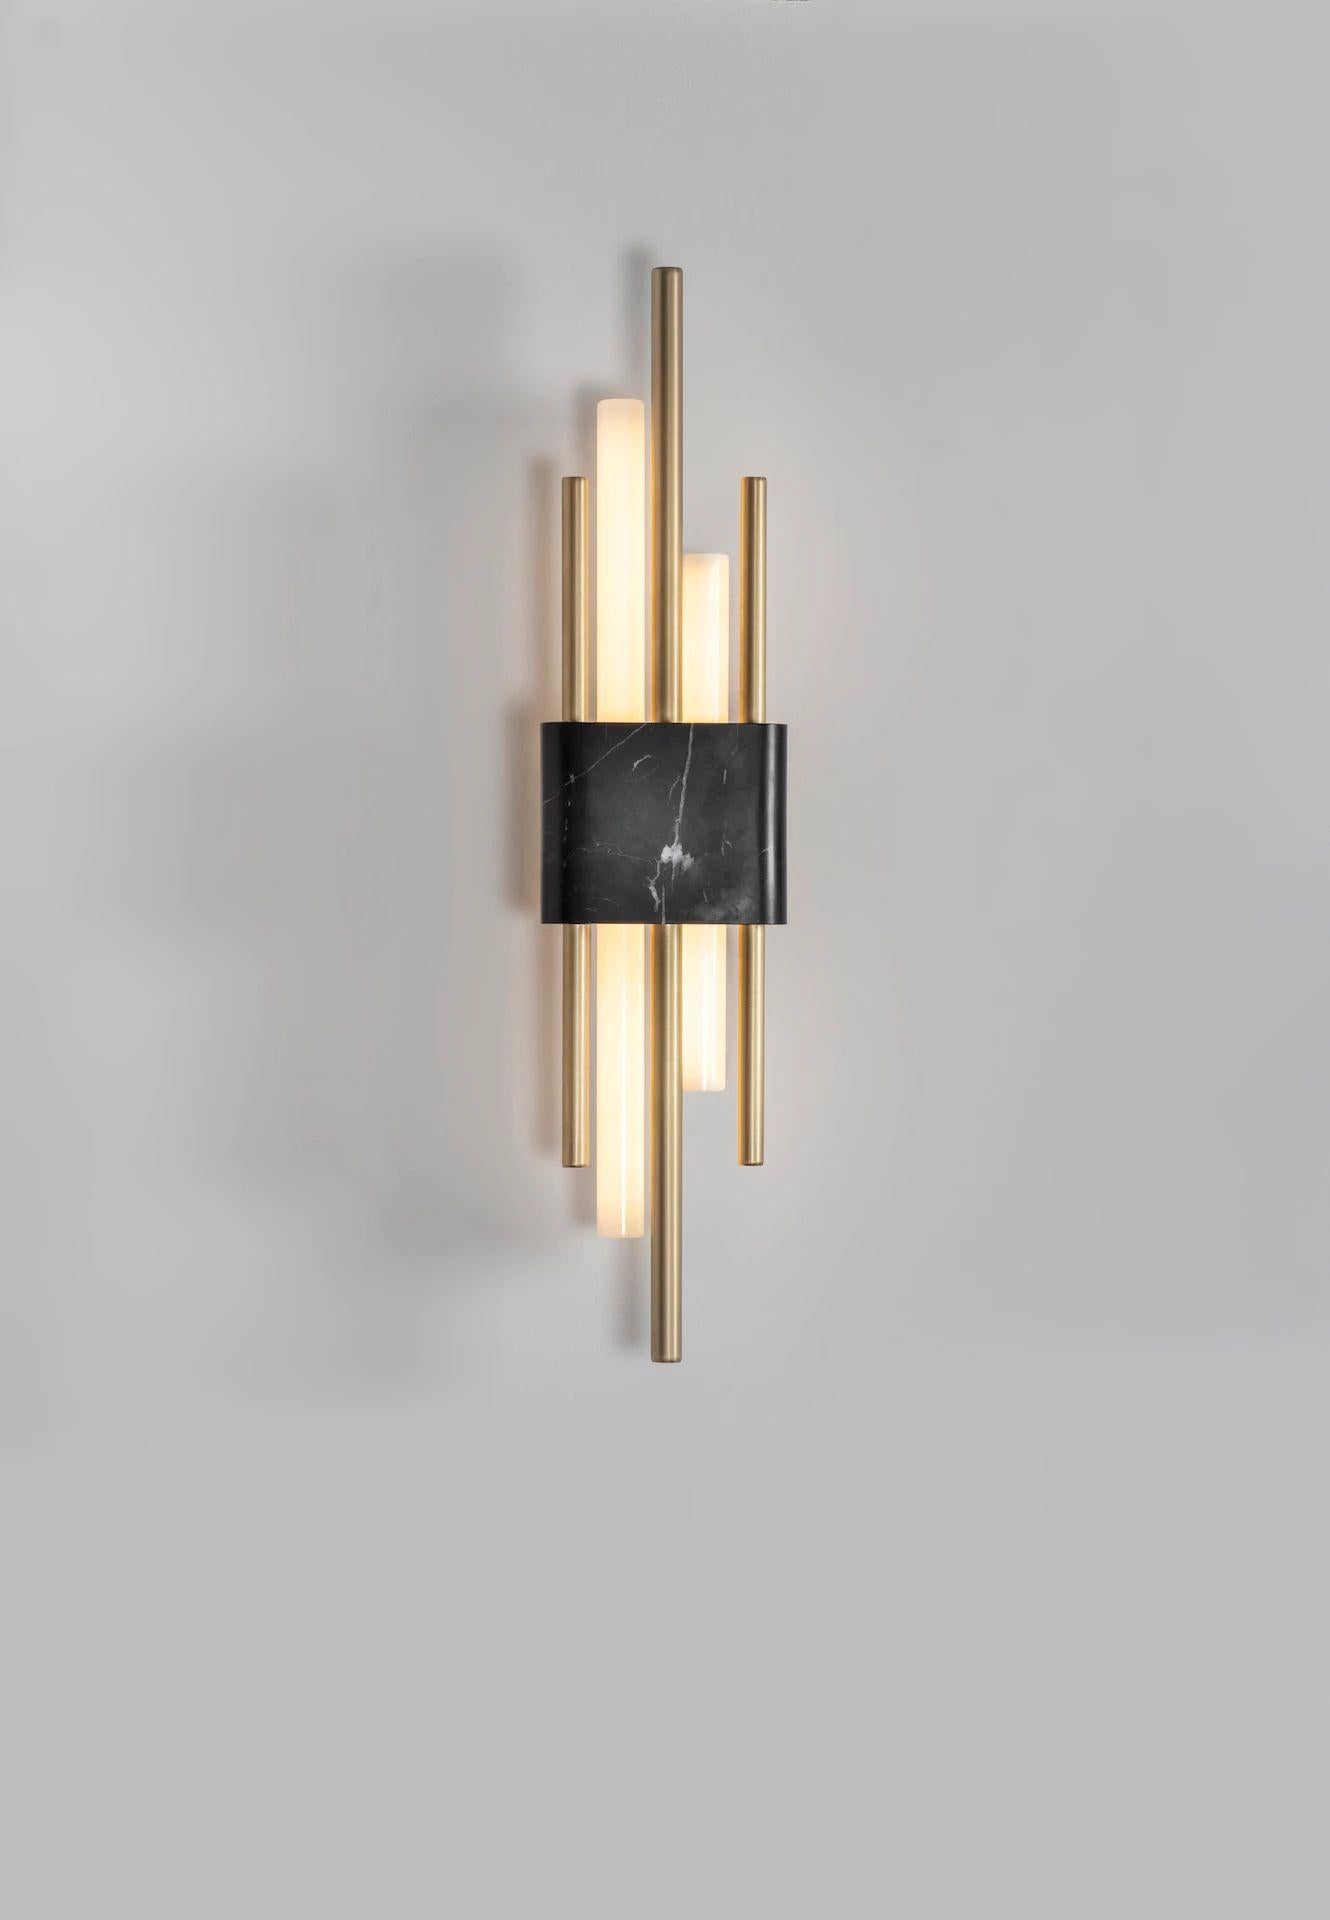 Tanto wall light, double, black marble by Bert Frank
Dimensions: 15 x 9 x H 65 cm
Materials: brushed brass, white carrara marble

When Adam Yeats and Robbie Llewellyn founded Bert Frank in 2013 it was a meeting of minds and the start of a